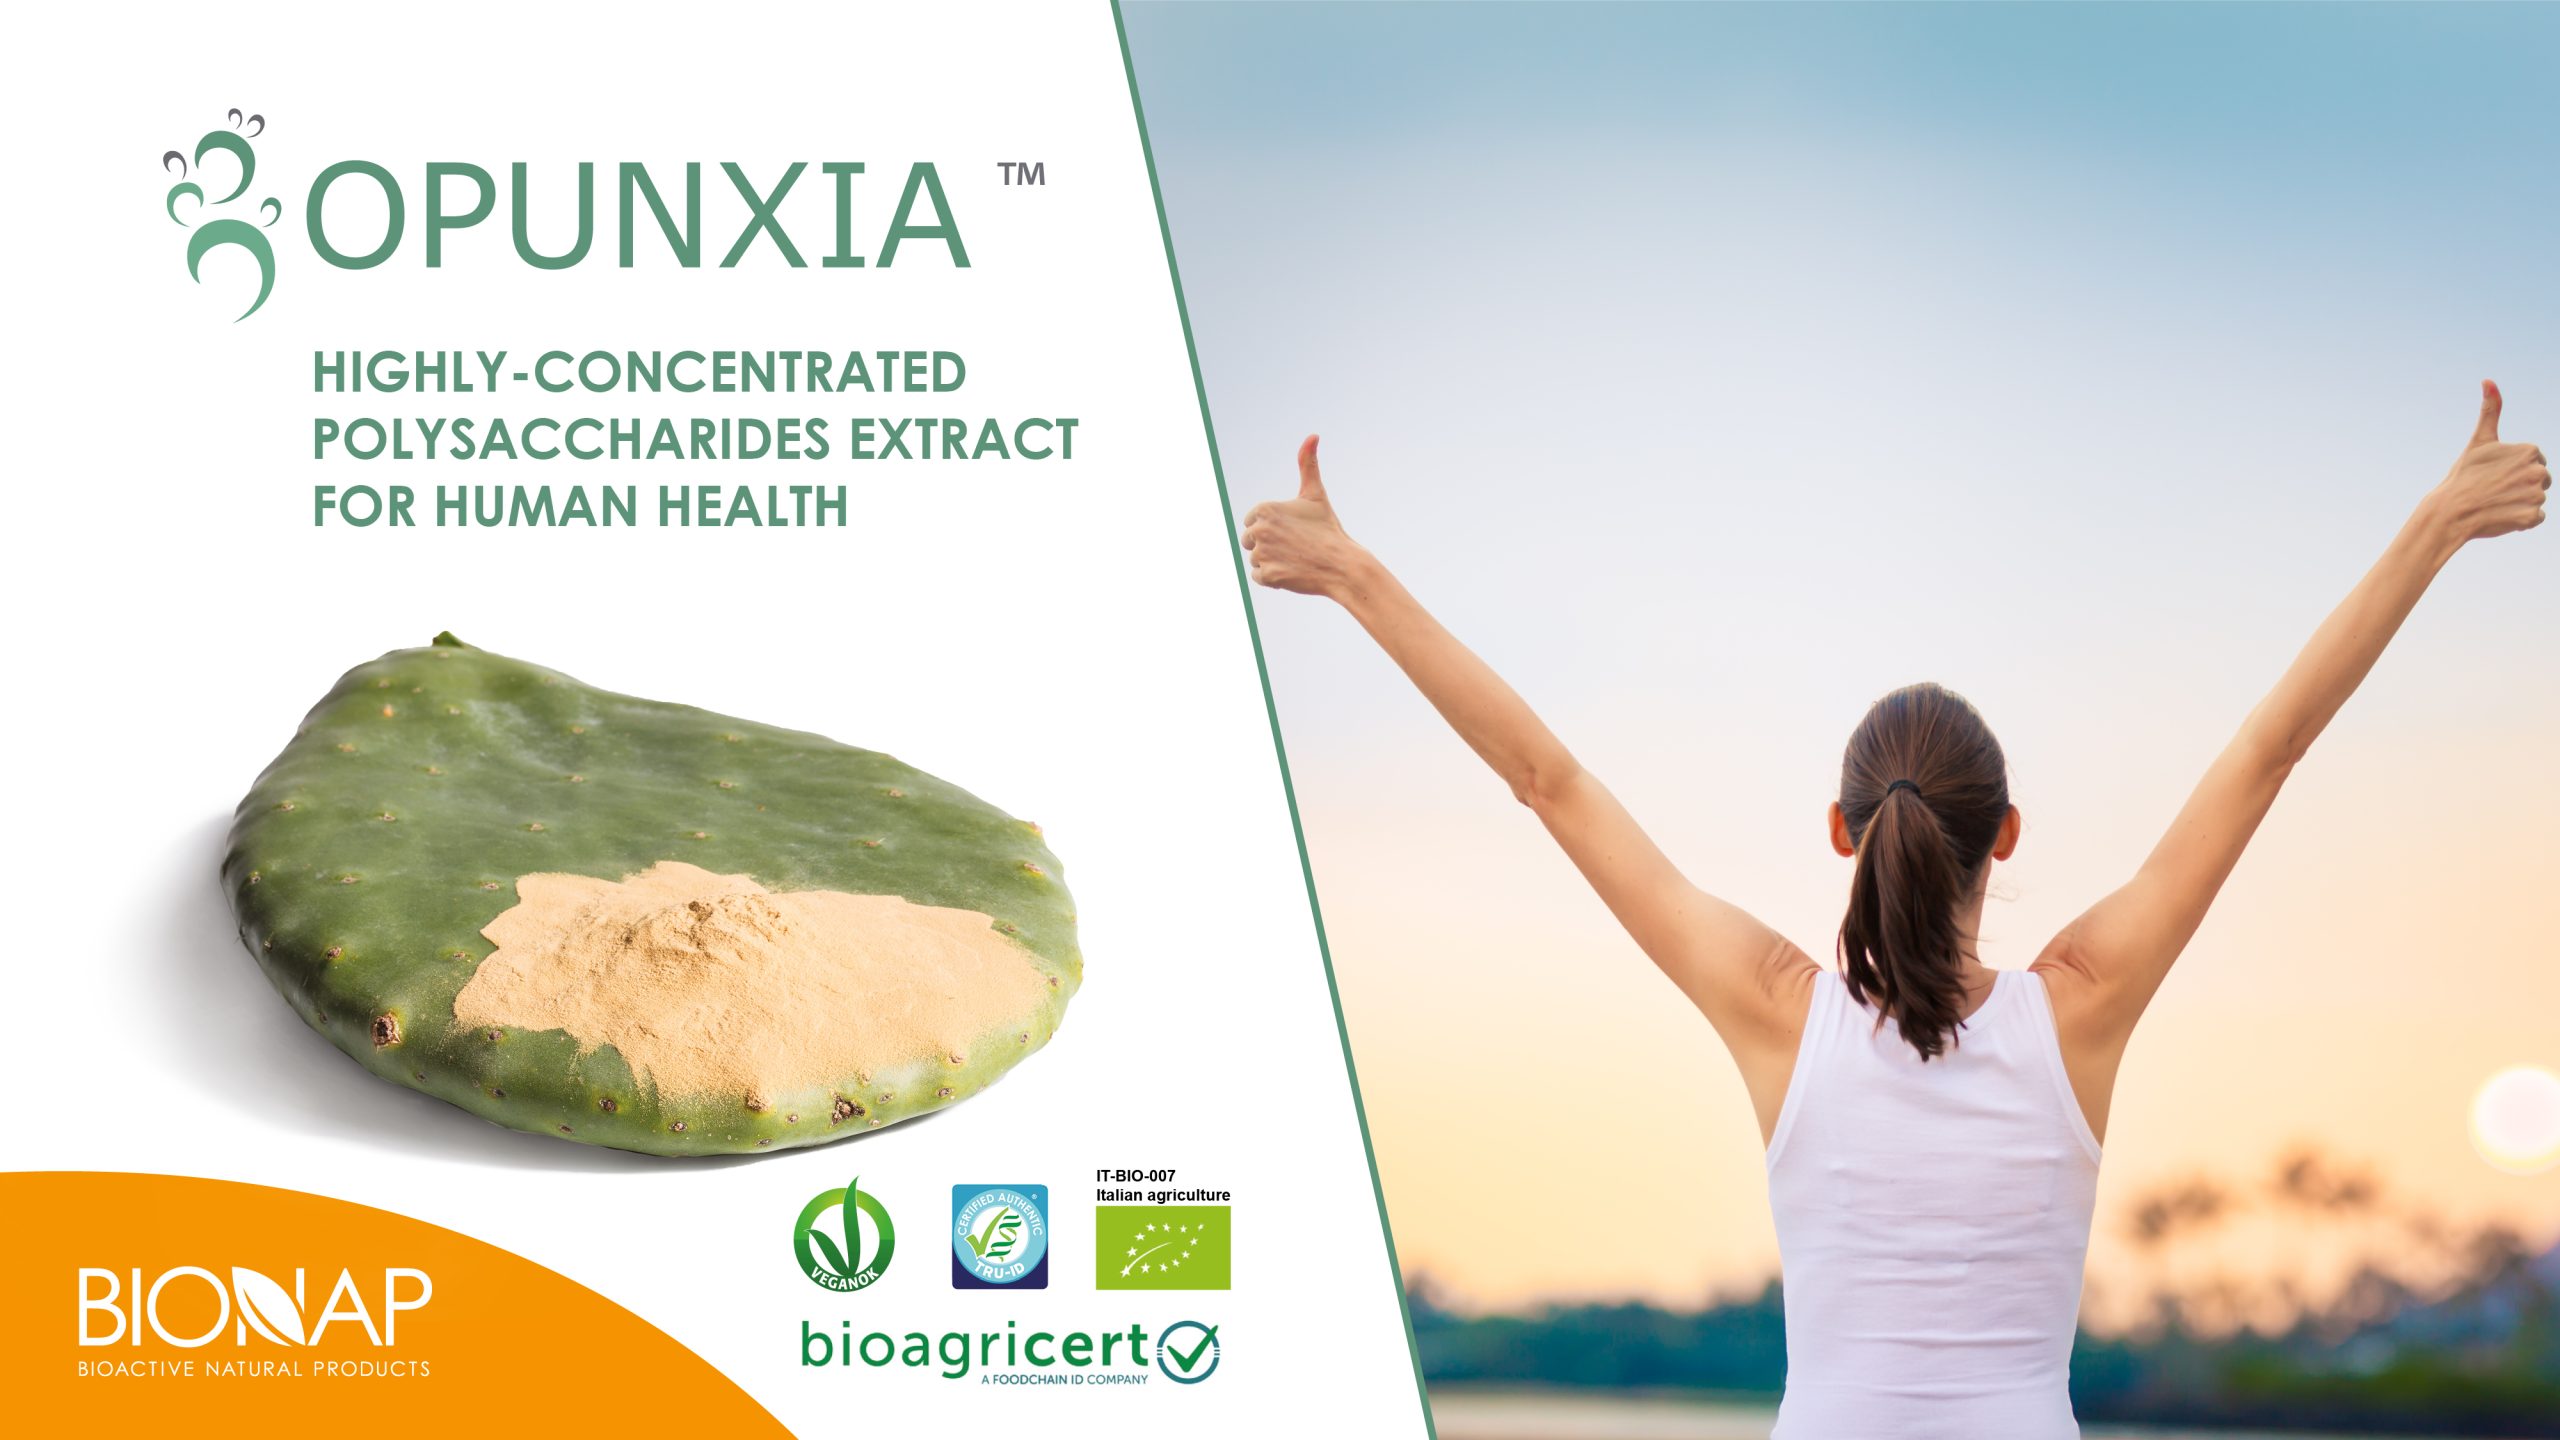 You are currently viewing <a href="https://www.nutraceuticalseurope.com/wp-admin/post.php?post=5525&action=edit">OPUNXIA™ by BIONAP</a>